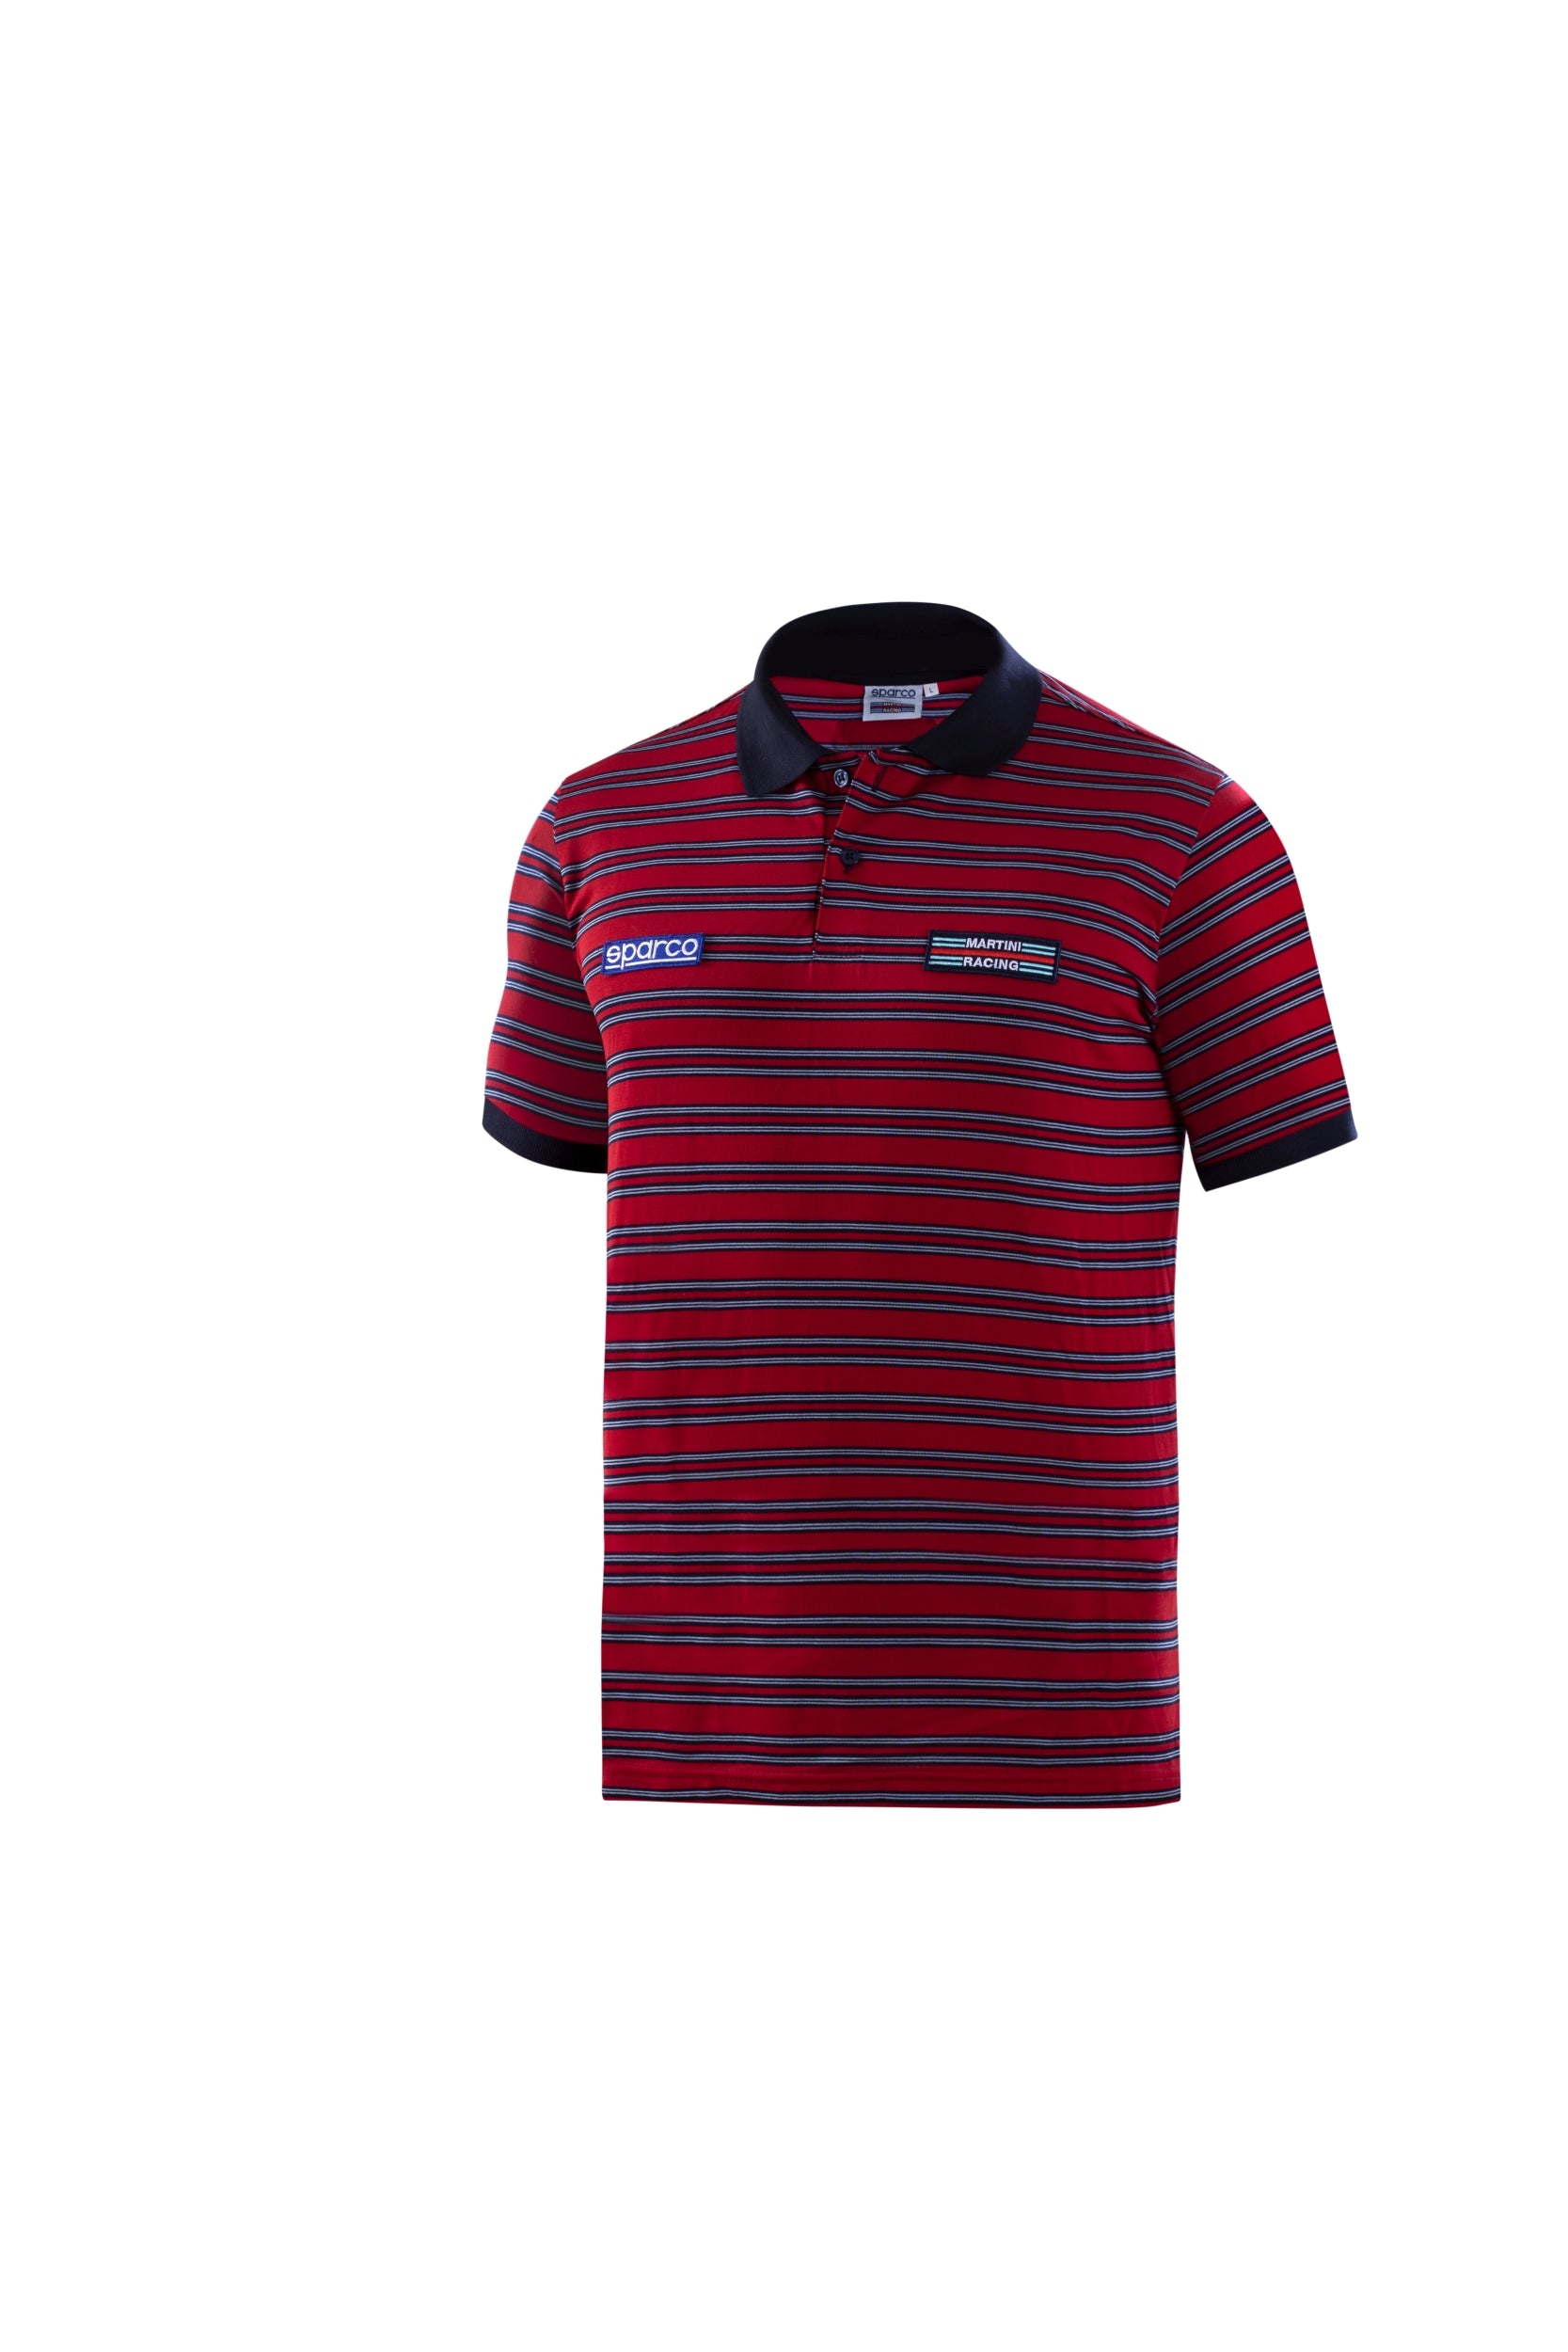 SPARCO 01396MRRS1S Polo MARTINI RACING Sportline Stripes, red, size S Photo-0 